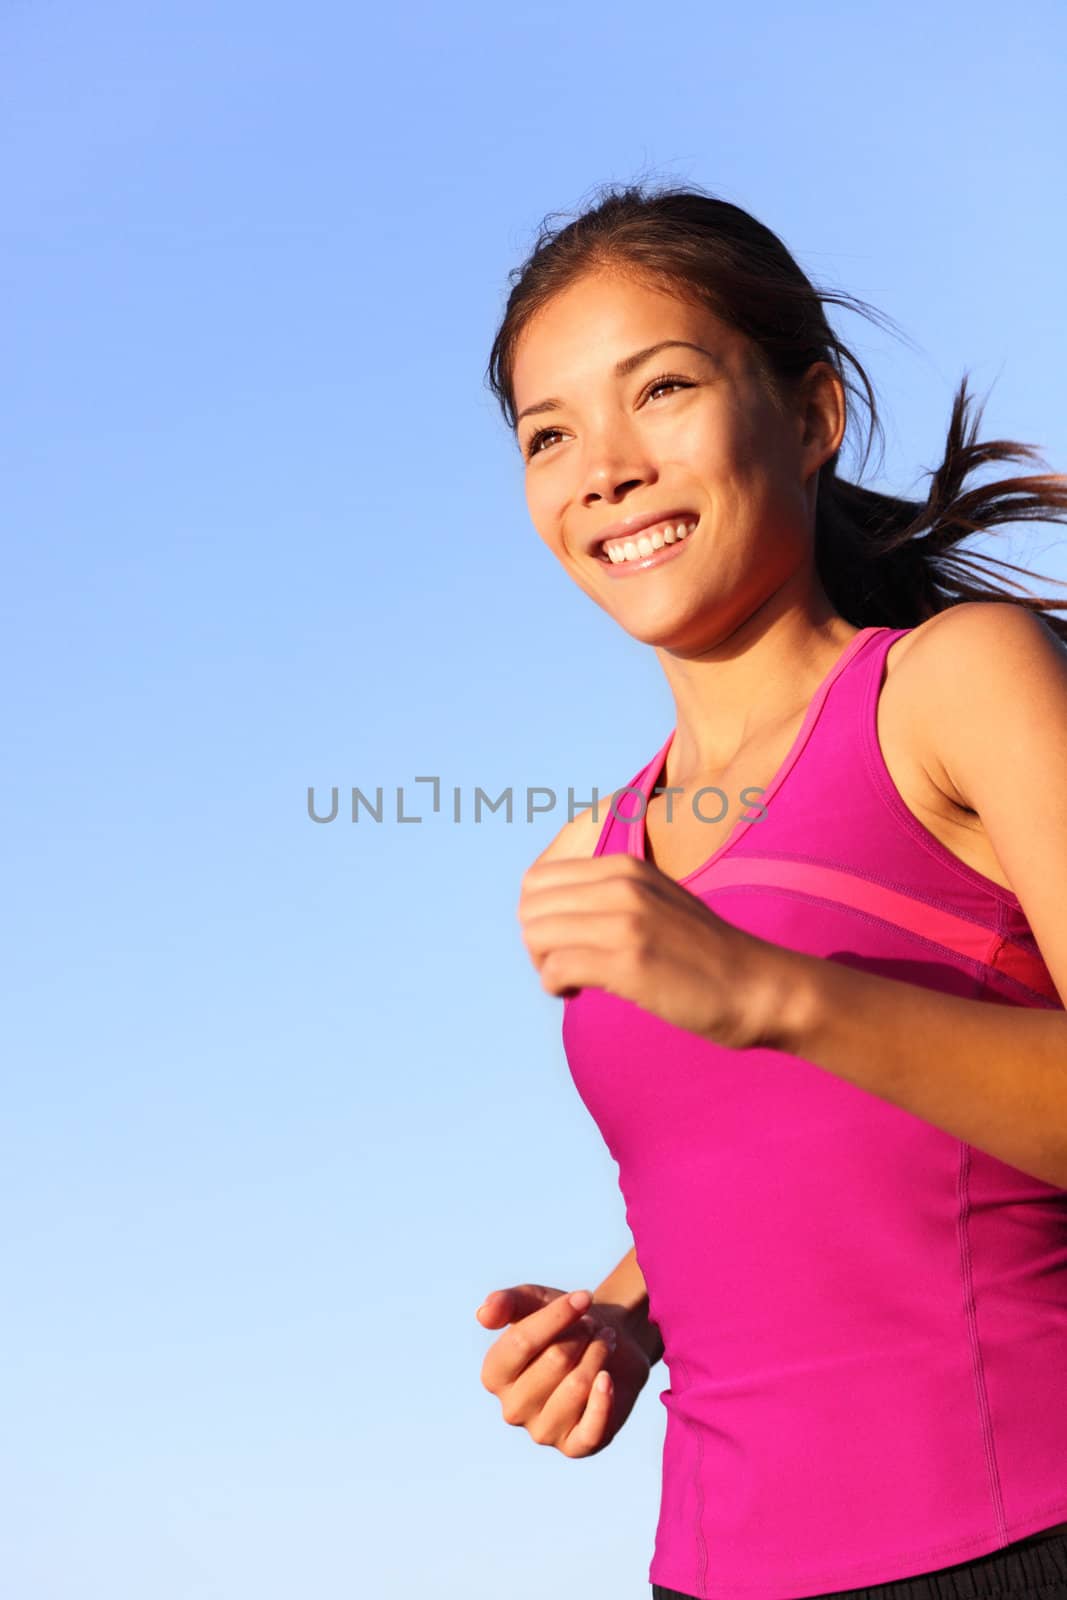 woman running. Female runner jogging outdoors against blue sky. Beautiful healthy and fit young mixed race Caucasian / Chinese Asian fitness model jogging outdoors at sunset.